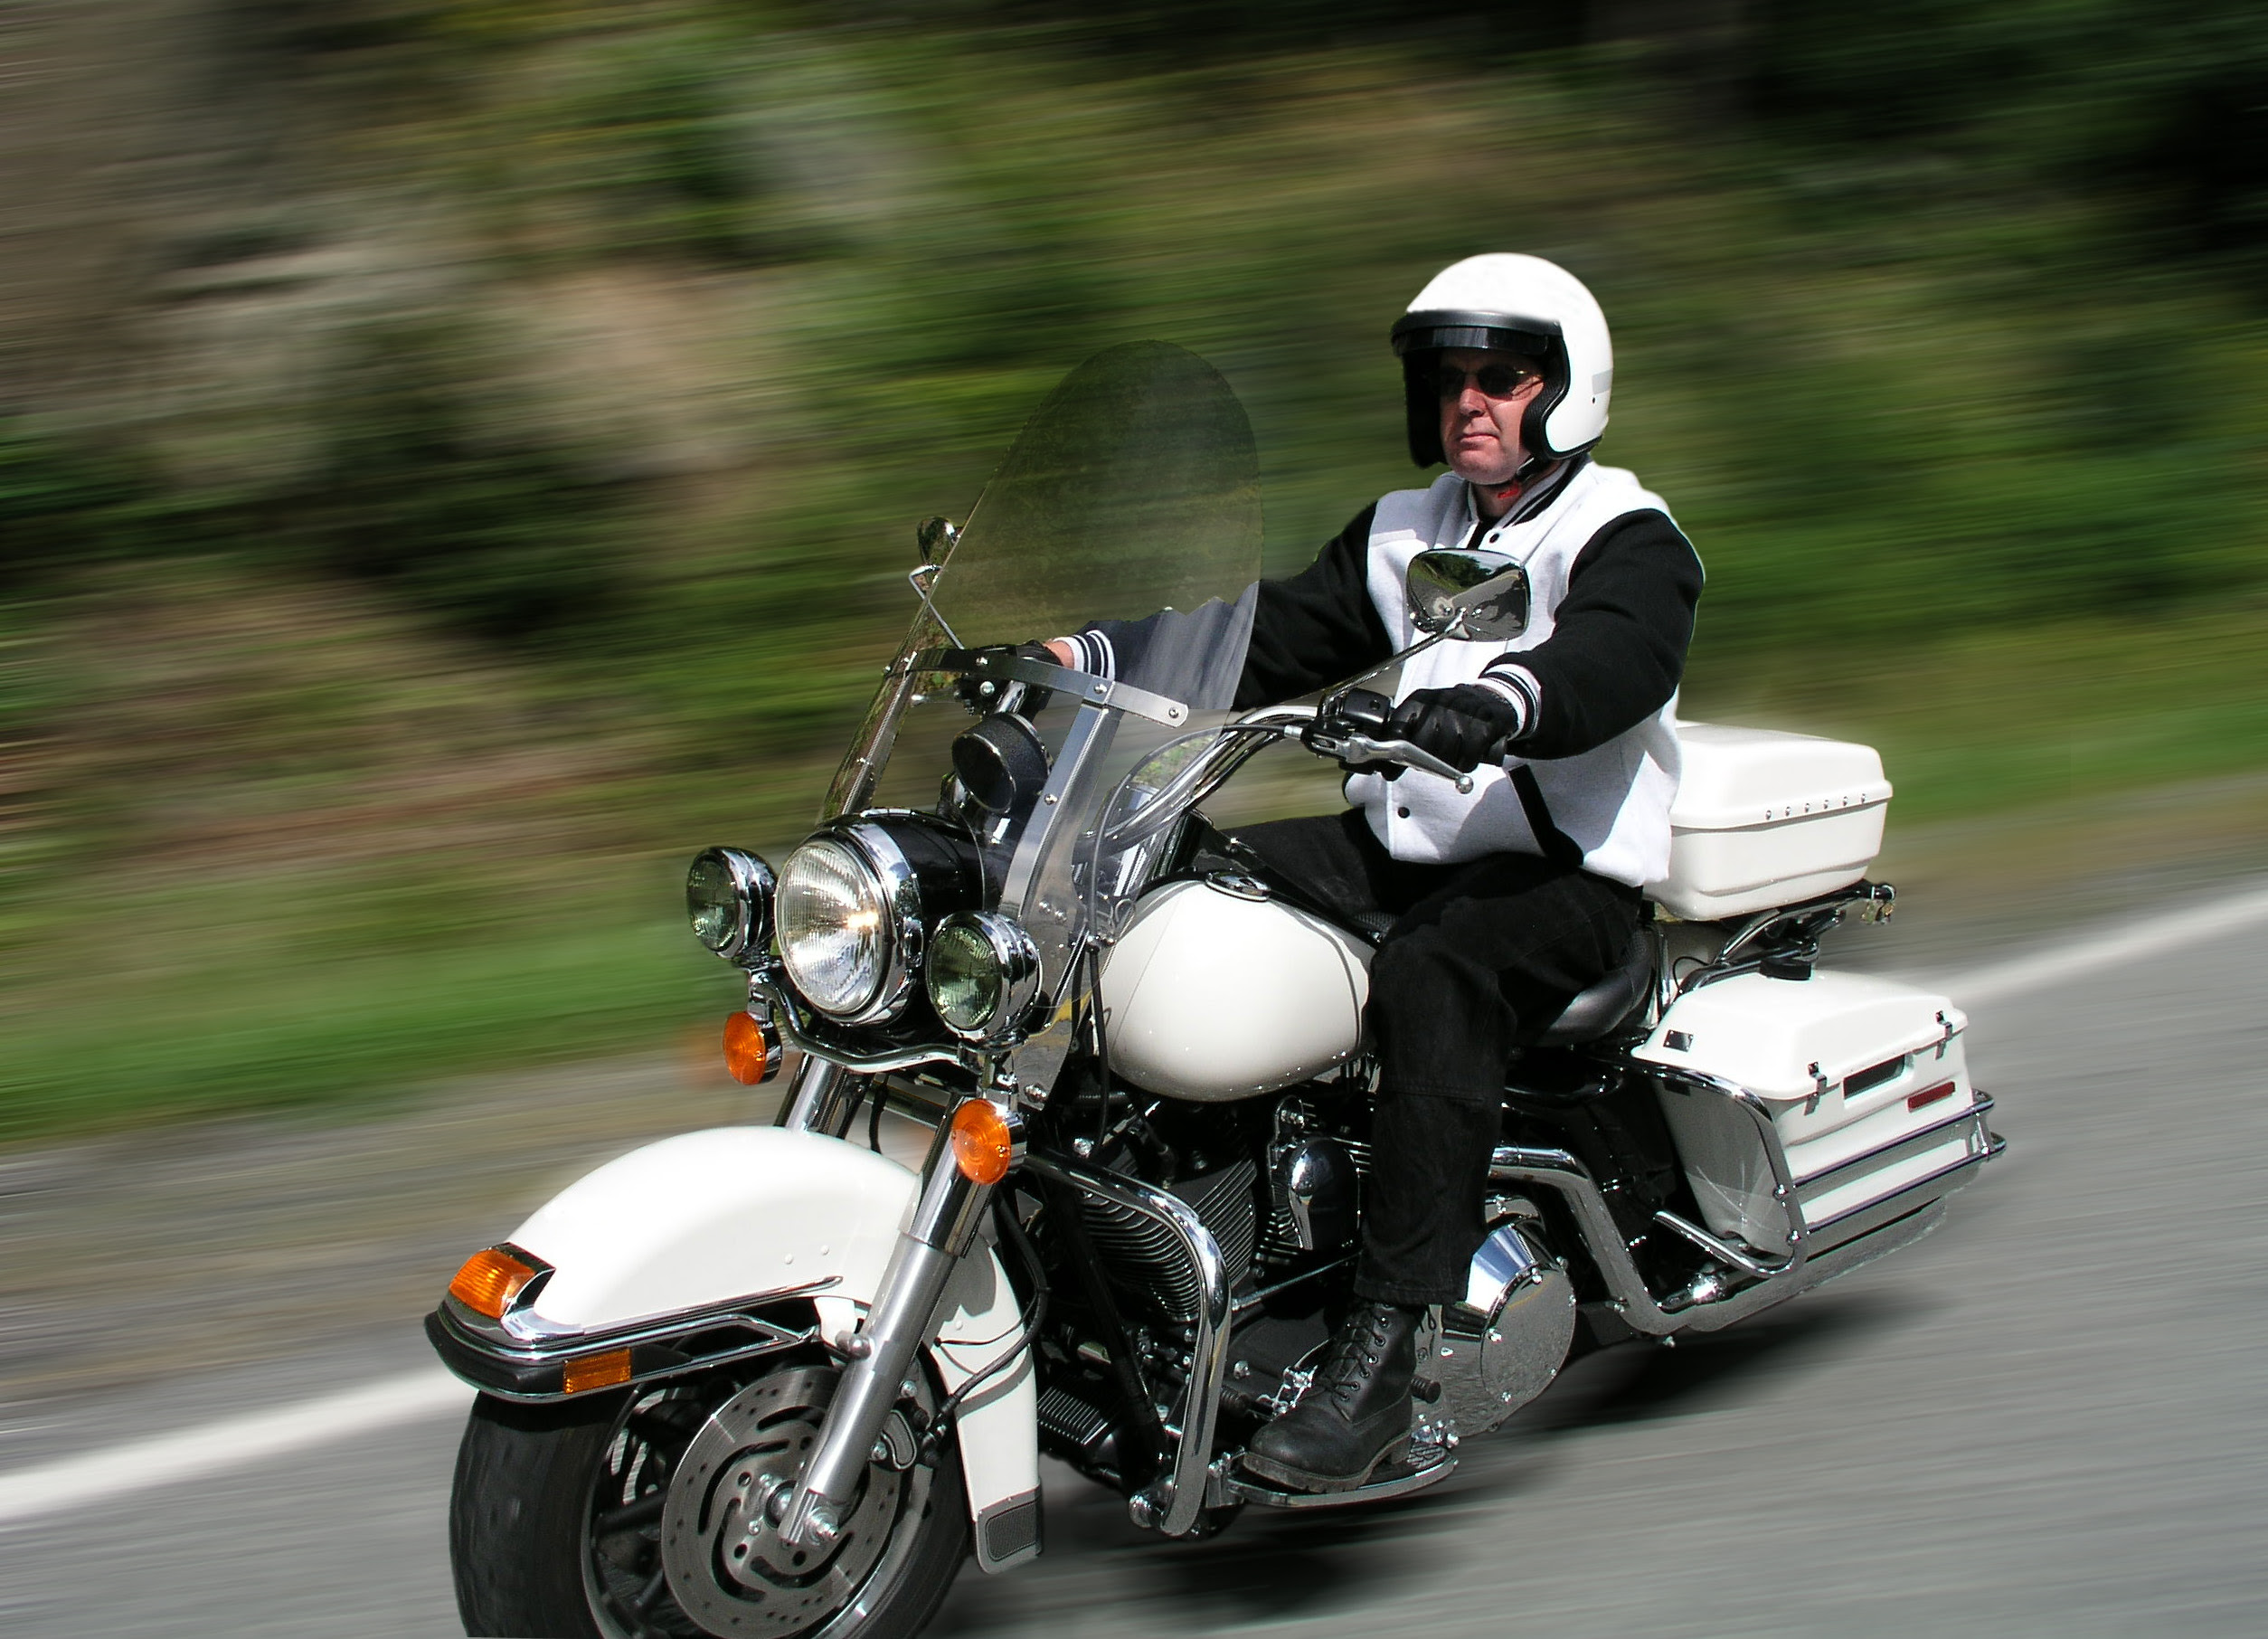 Motorcycle Insurance Online Get Tips On Safe Riding Get